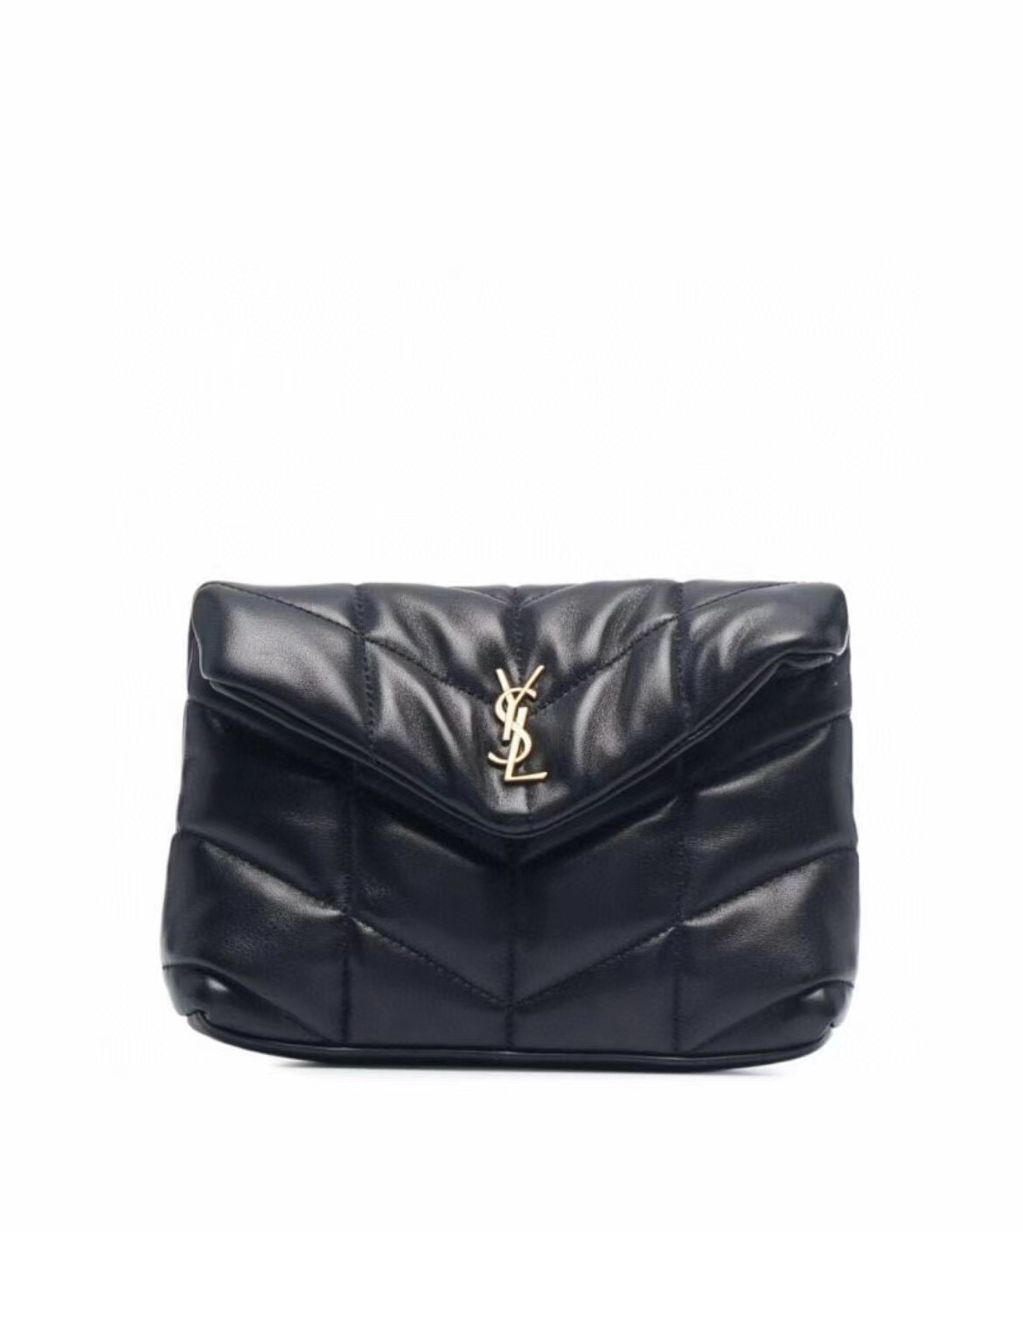 SAINT LAUREN PUFFER SMALL POUCH IN QUILTED LAMBSKIN 6508801 black&silver